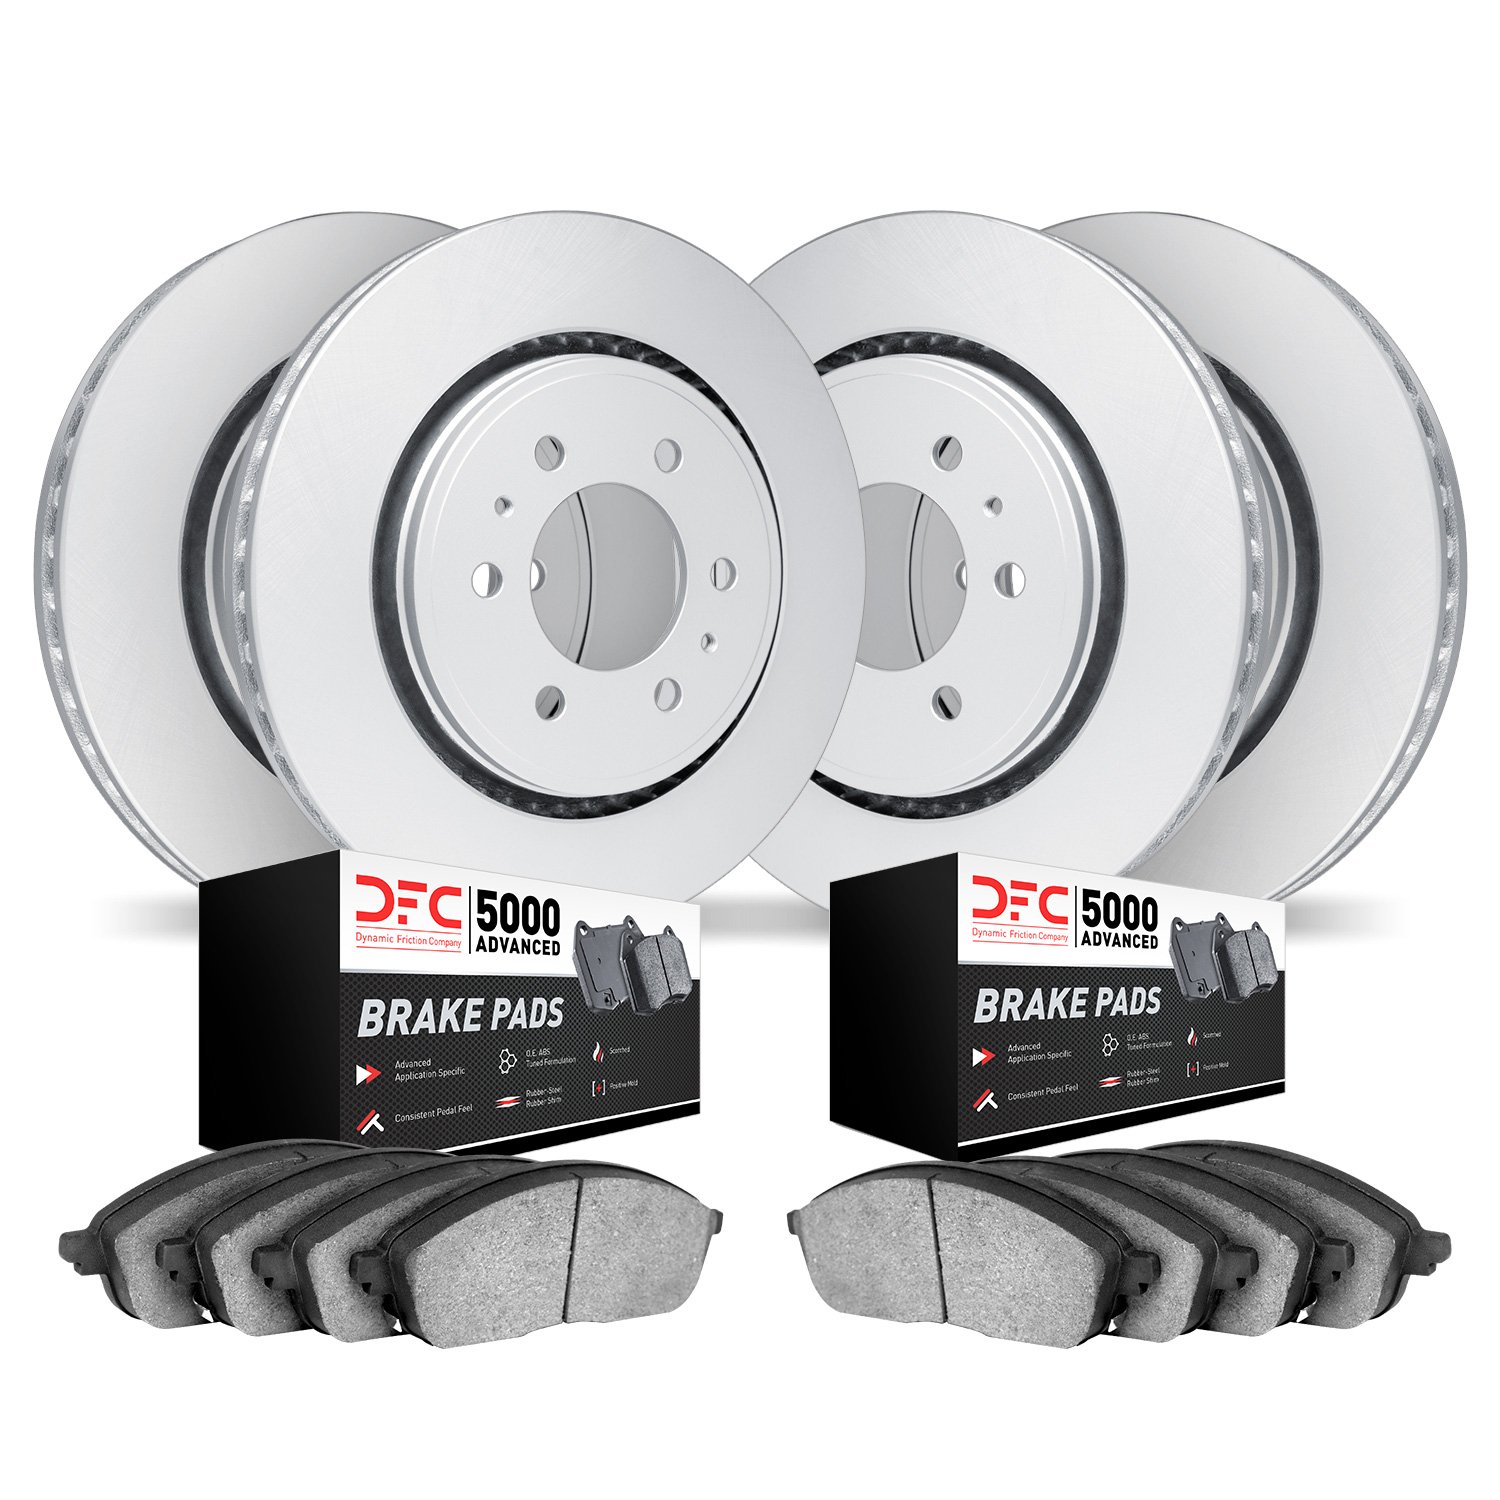 4504-46042 Geospec Brake Rotors w/5000 Advanced Brake Pads Kit, 2004-2009 GM, Position: Front and Rear